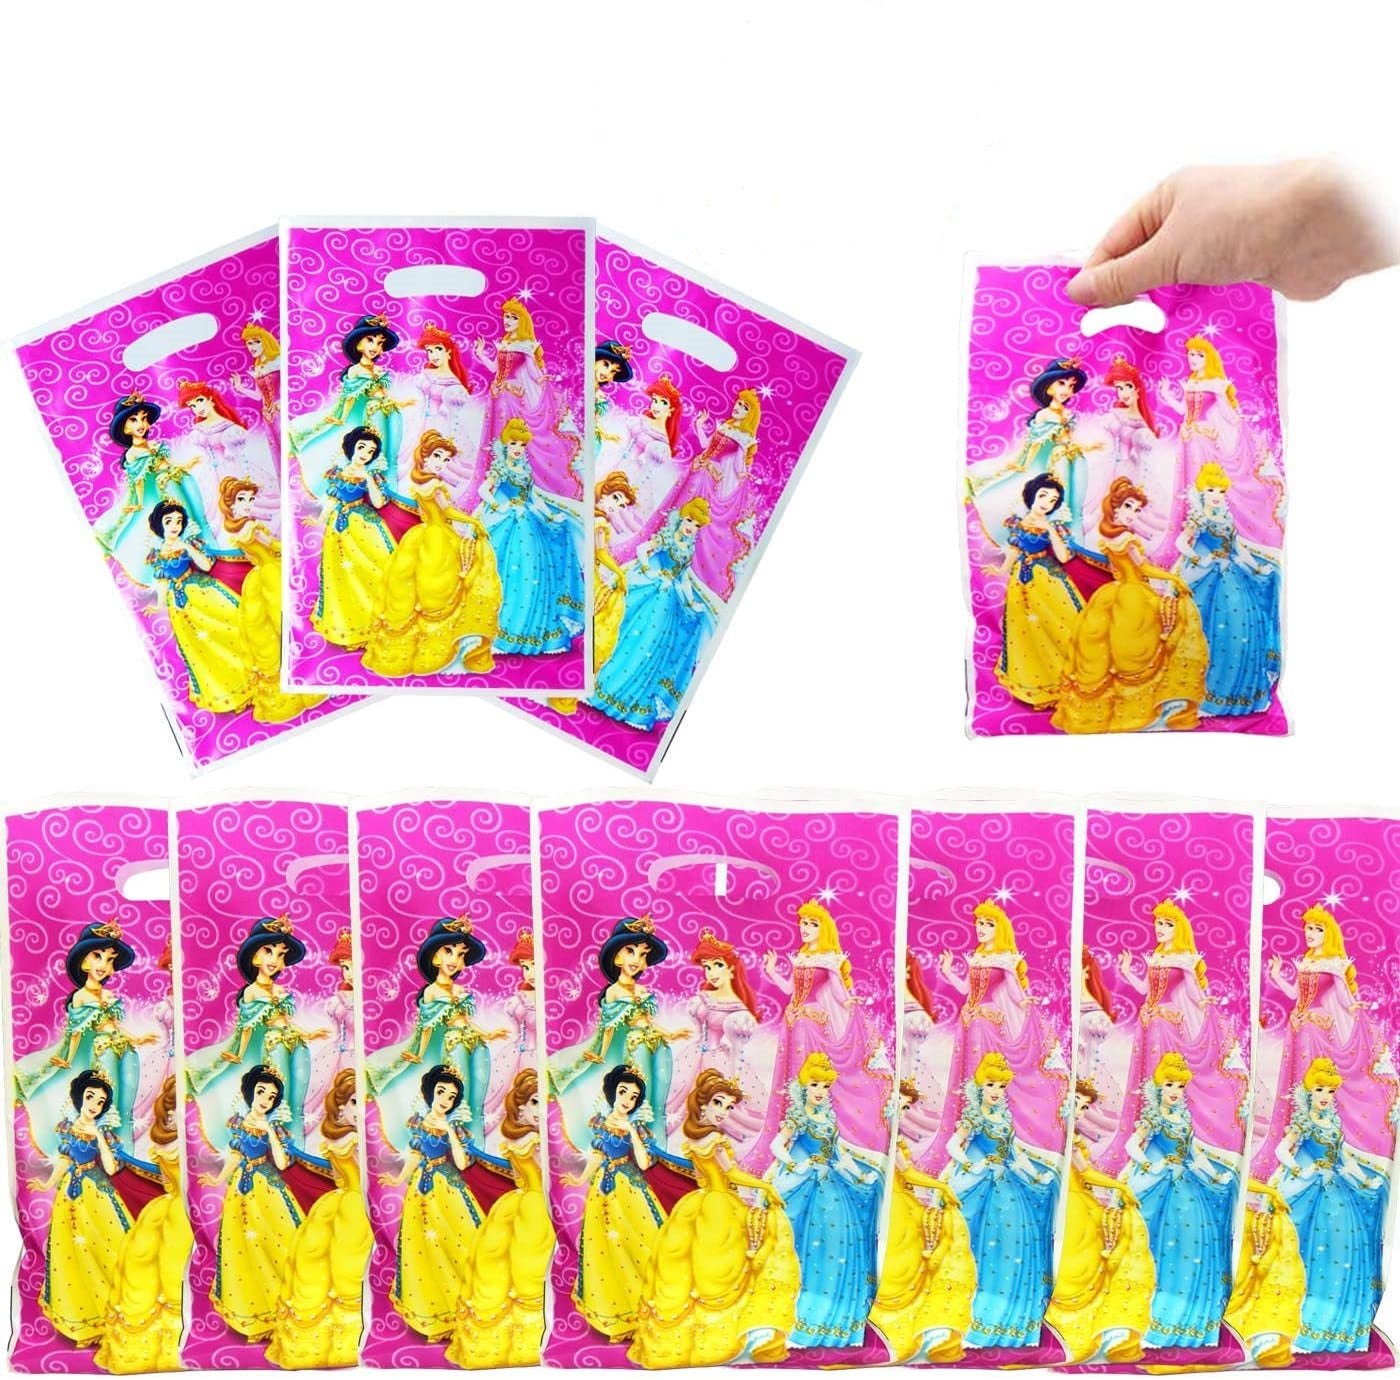 Princess Theme Goody Bags / Loot Bags for Birthday Party Decoration and Celebration